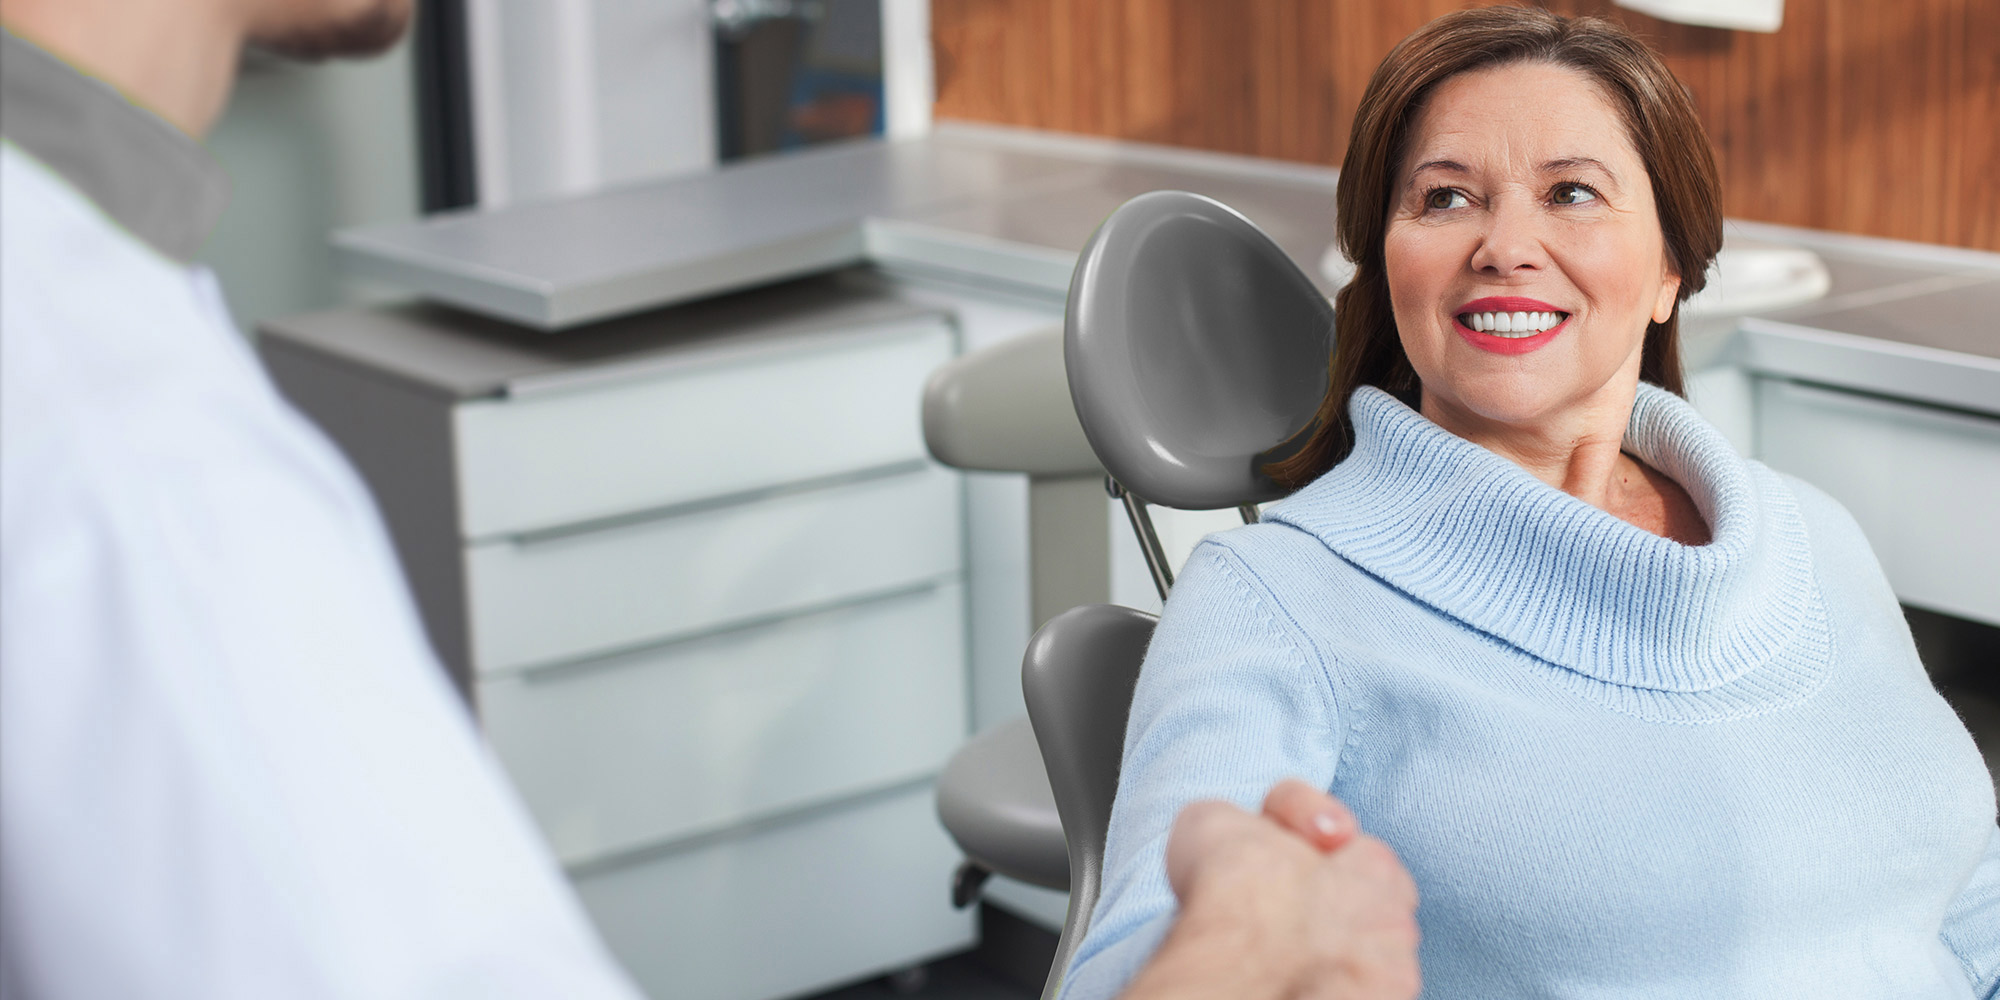 Very nice lady in dental chair smiling looking at doctor shaking his hand.